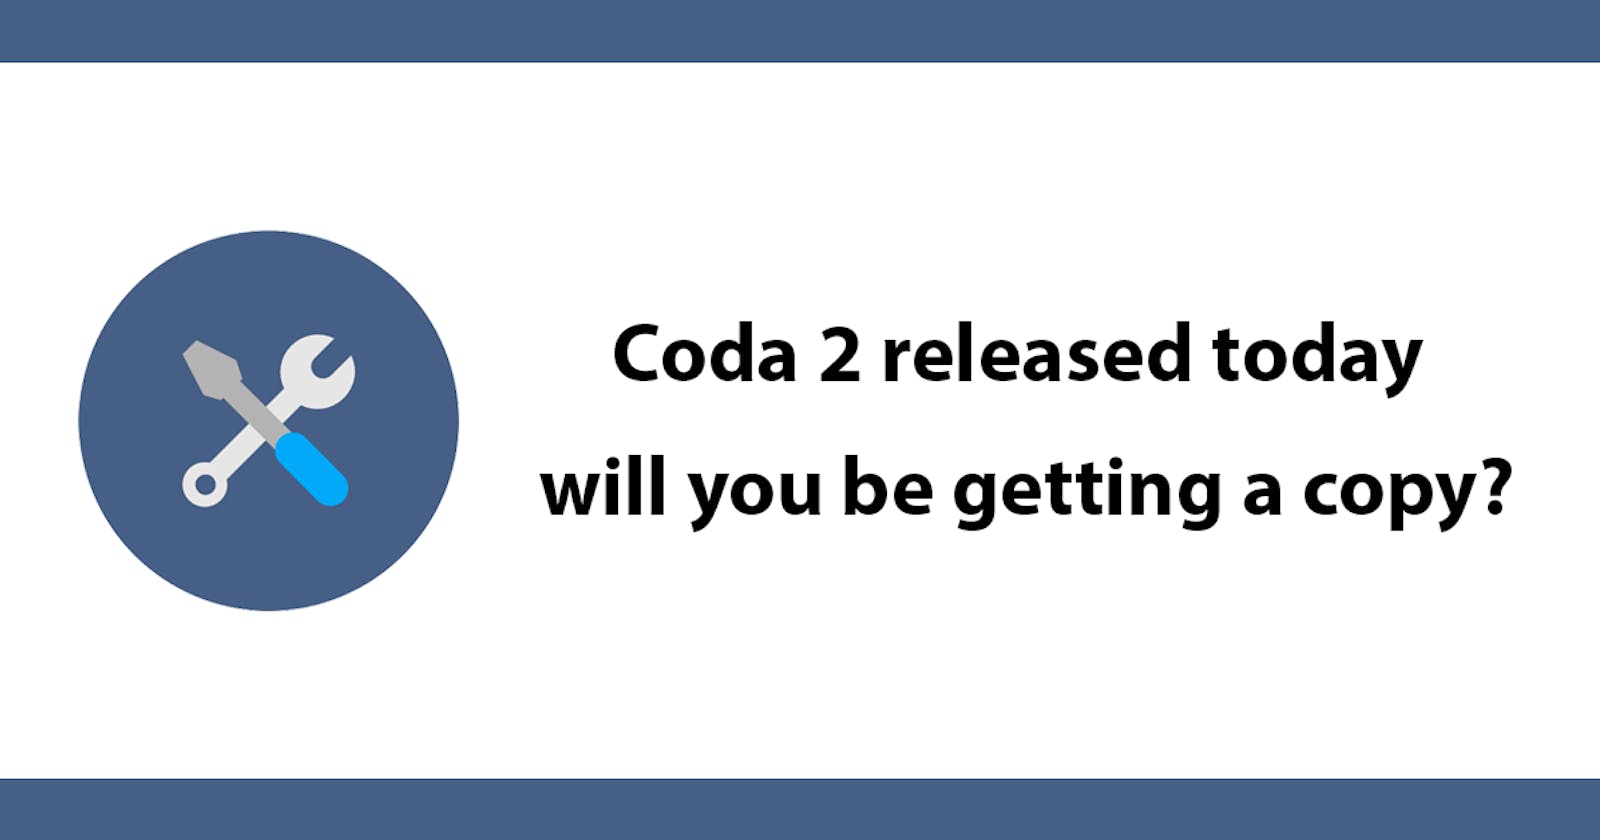 Coda 2 released today will you be getting a copy?